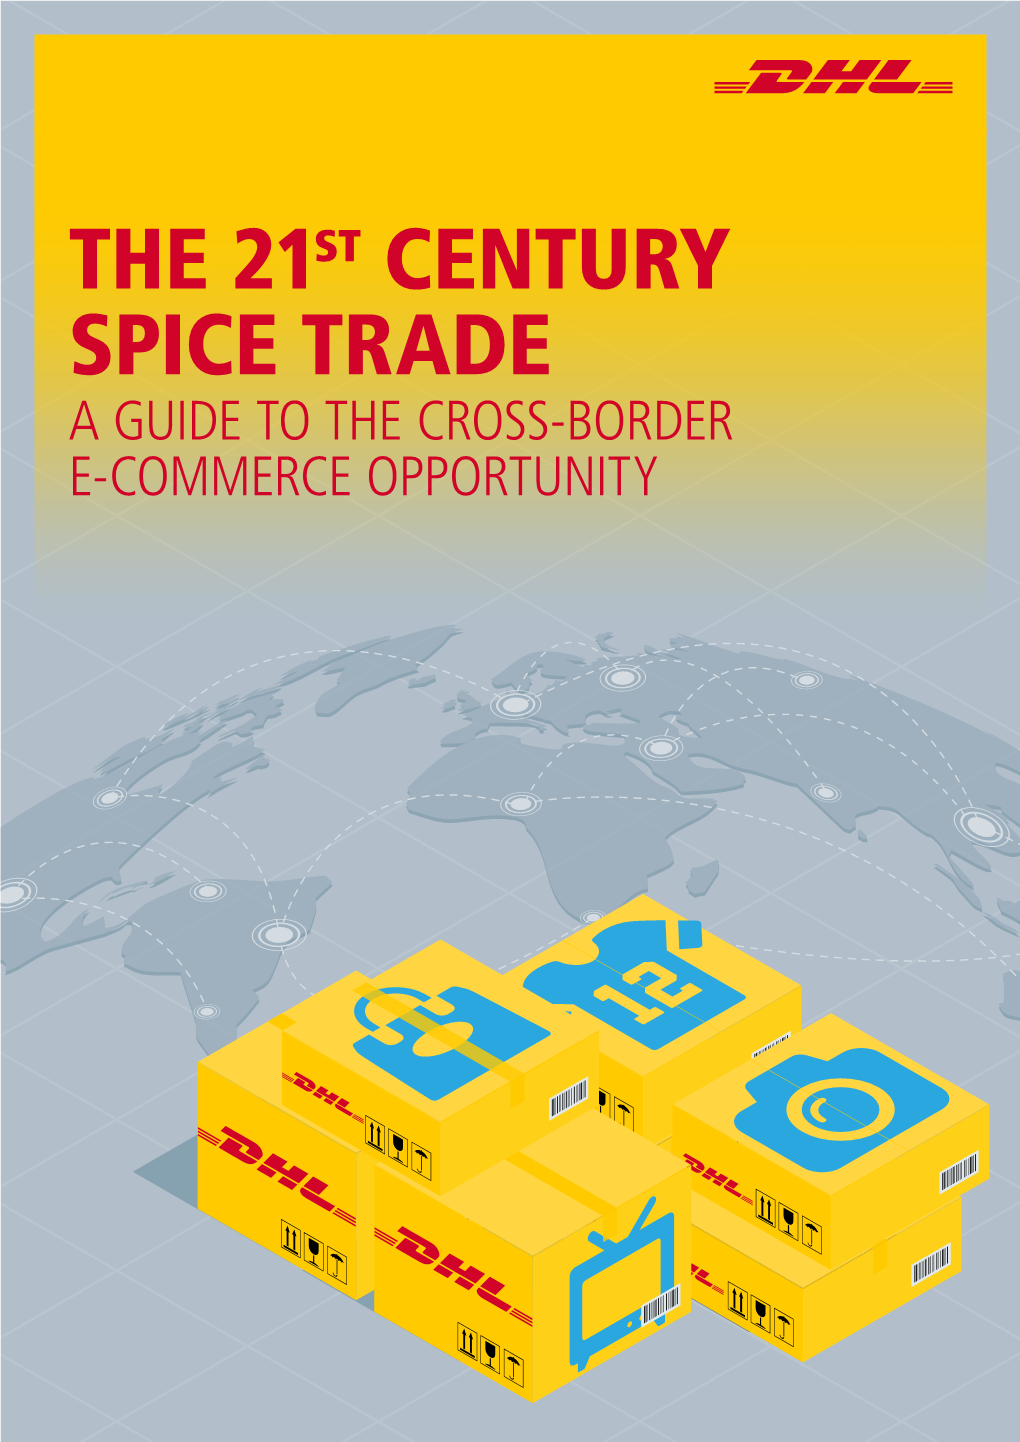 A GUIDE to the CROSS-BORDER E-COMMERCE OPPORTUNITY 2 the 21St Century Spice Trade